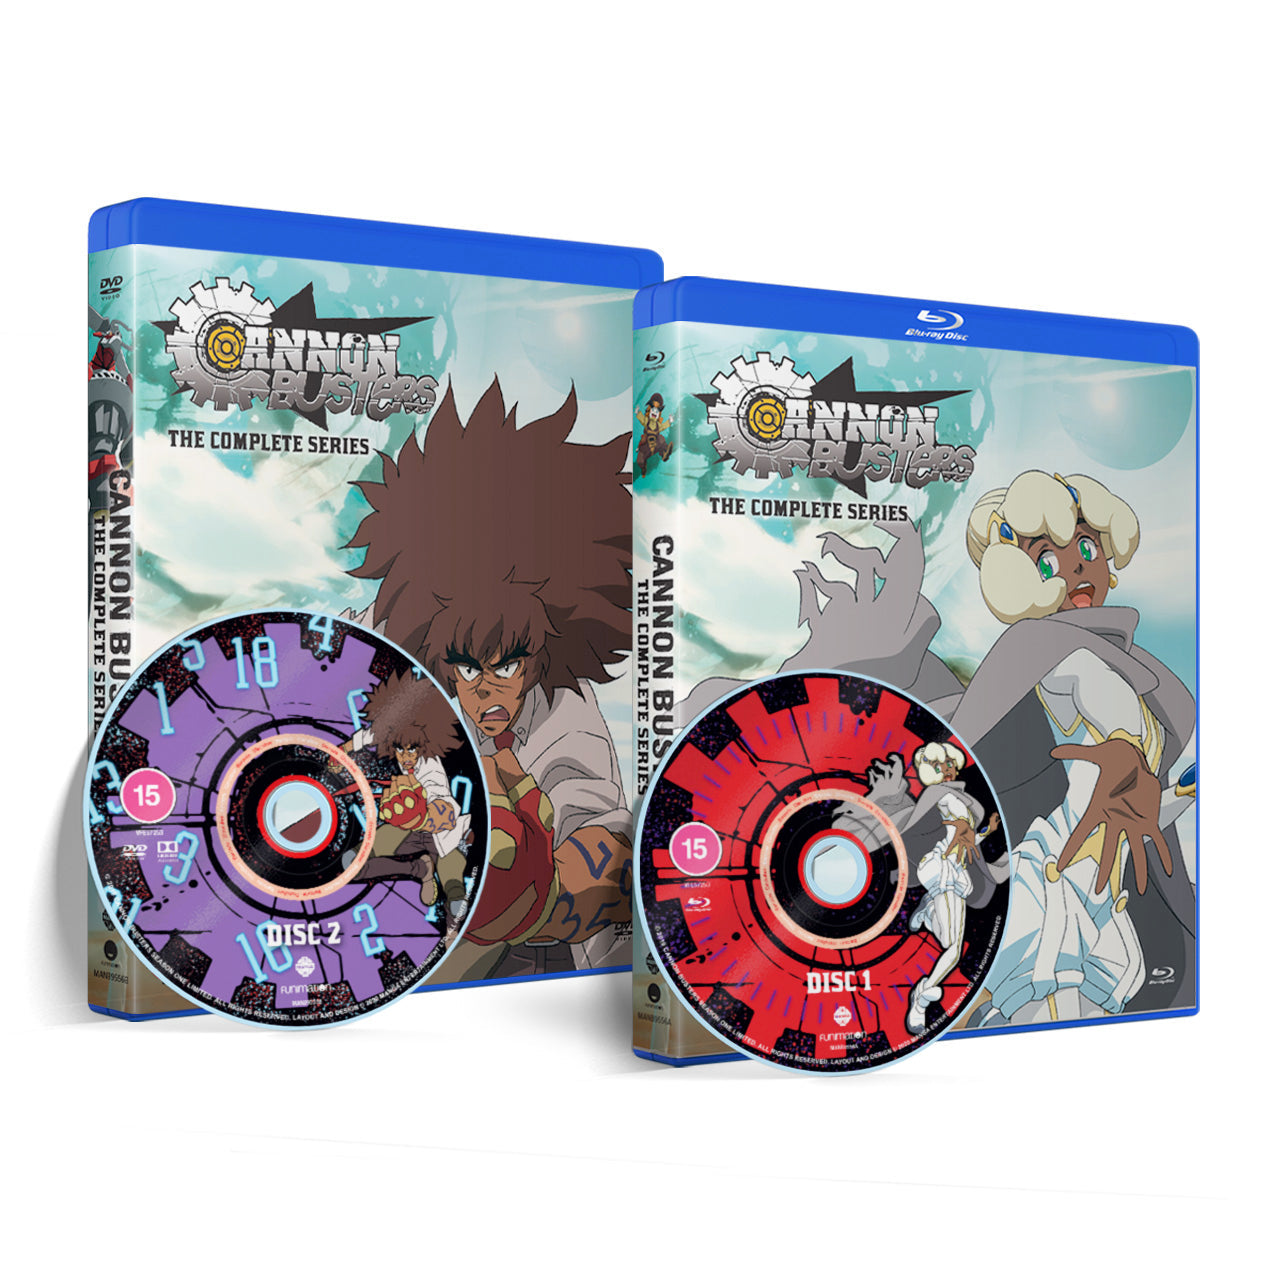 Cannon Busters - The Complete Series - Limited Edition - Blu-ray + DVD image count 4